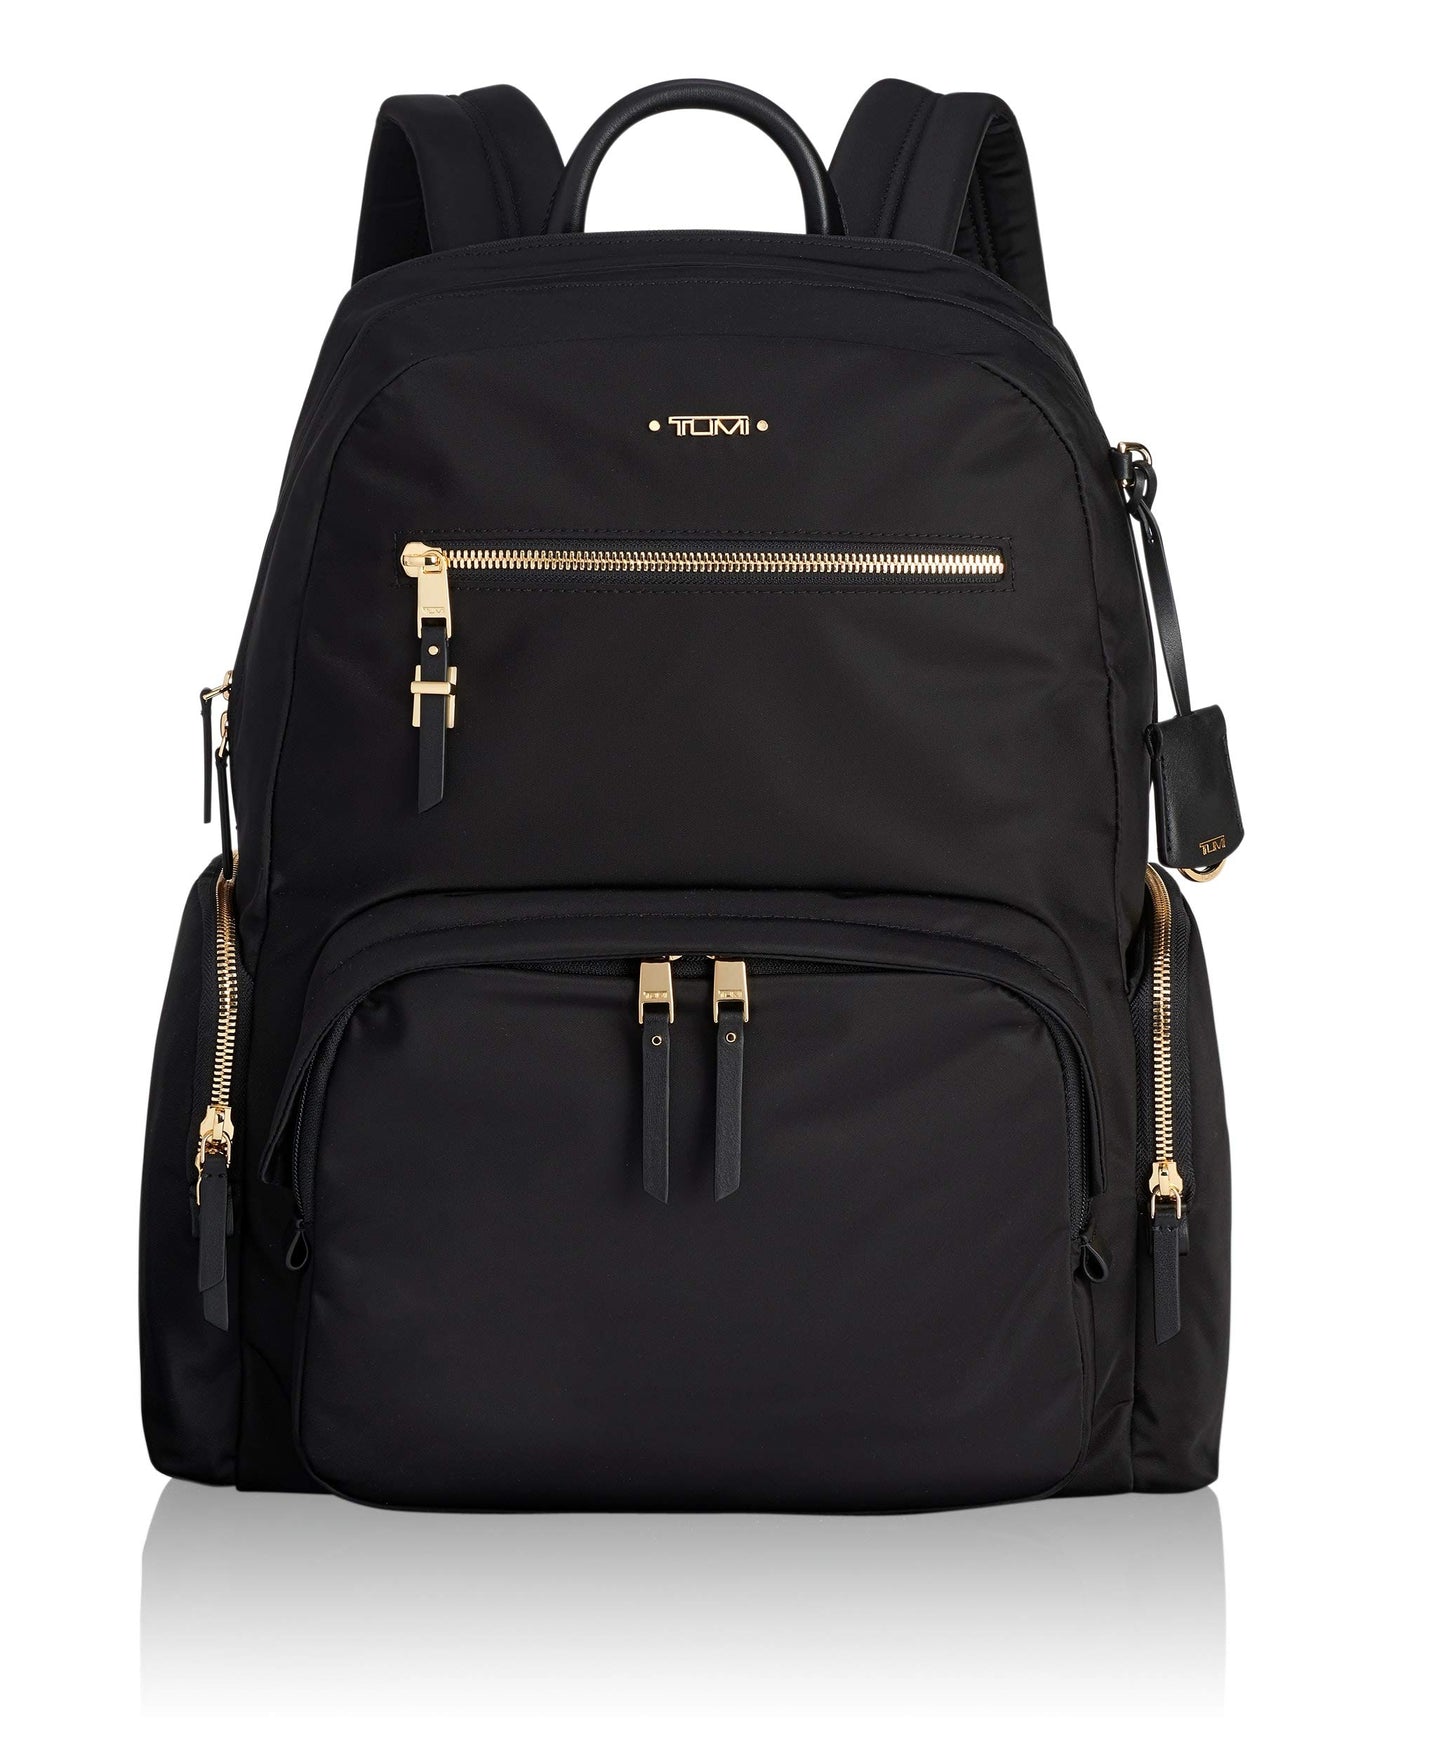 TUMI - Voyageur Carson Laptop Backpack - 15 Inch Computer Bag for Women